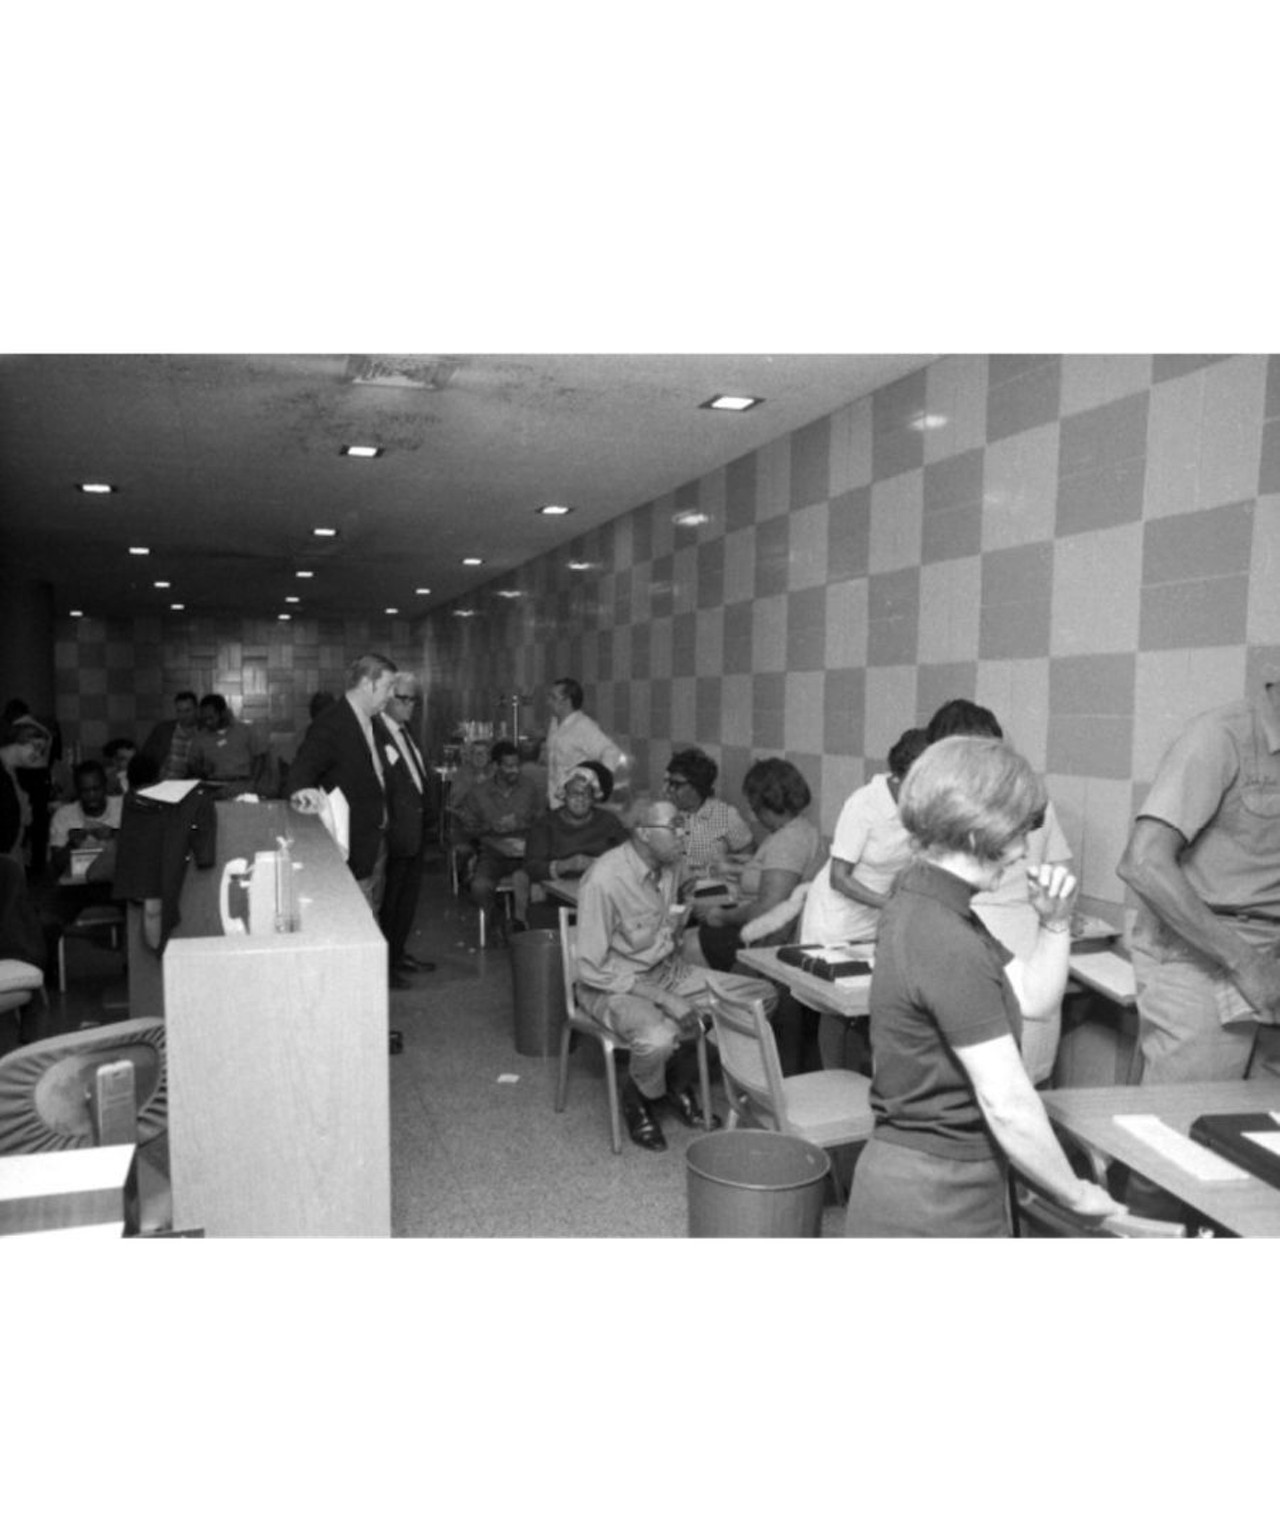 Workers checking ballots in basement cafeteria of City-County bldg. after breakdown of new punch-card voting system. (1970)
All photos courtesy of Walter P. Reuther Library, Archives of Labor and Urban Affairs, Wayne State University